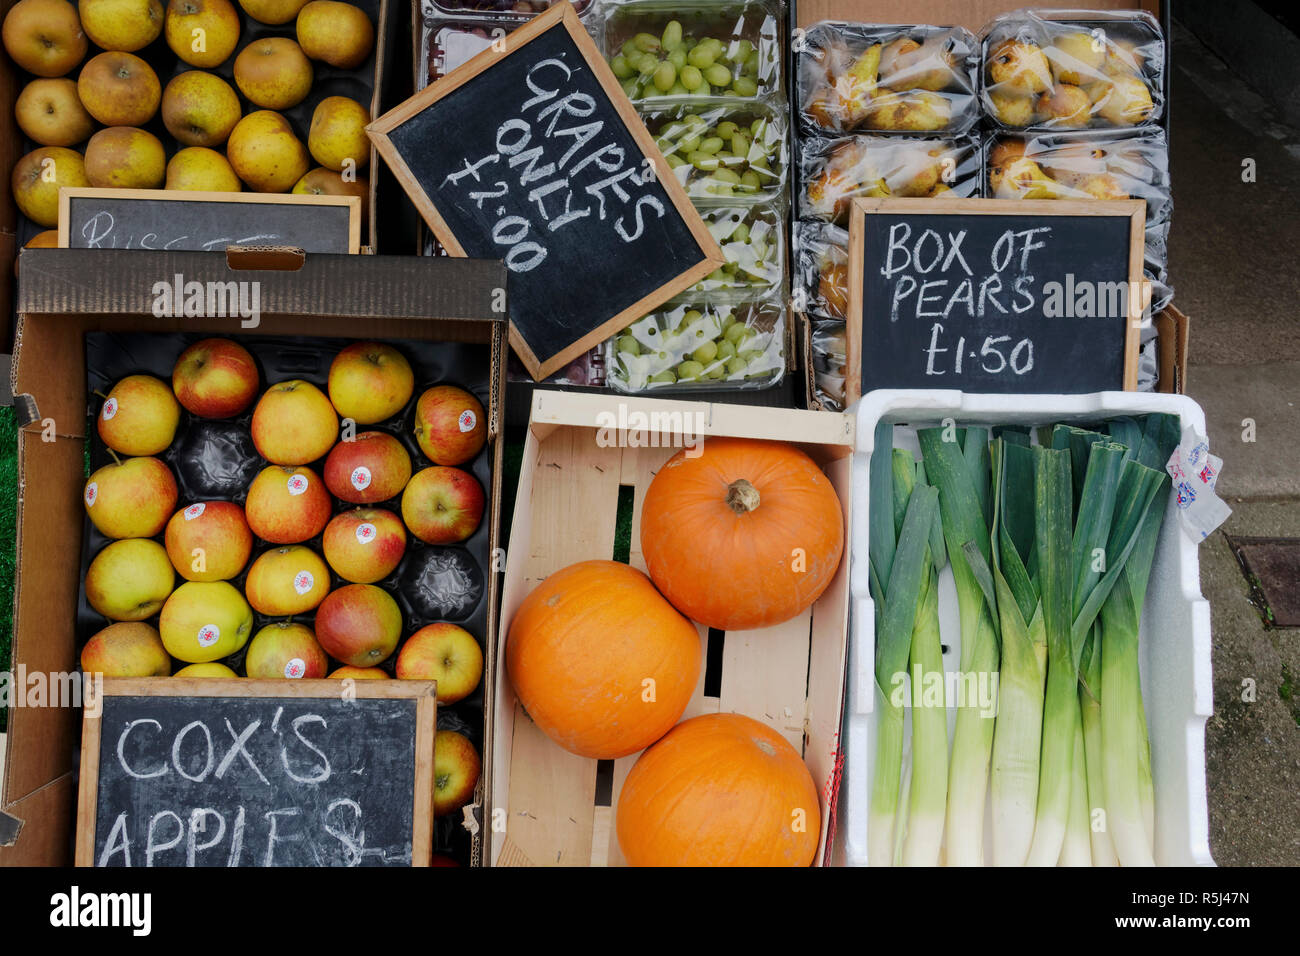 Display of boxes of fruit and vegetables outside greengrocers shop. Stock Photo